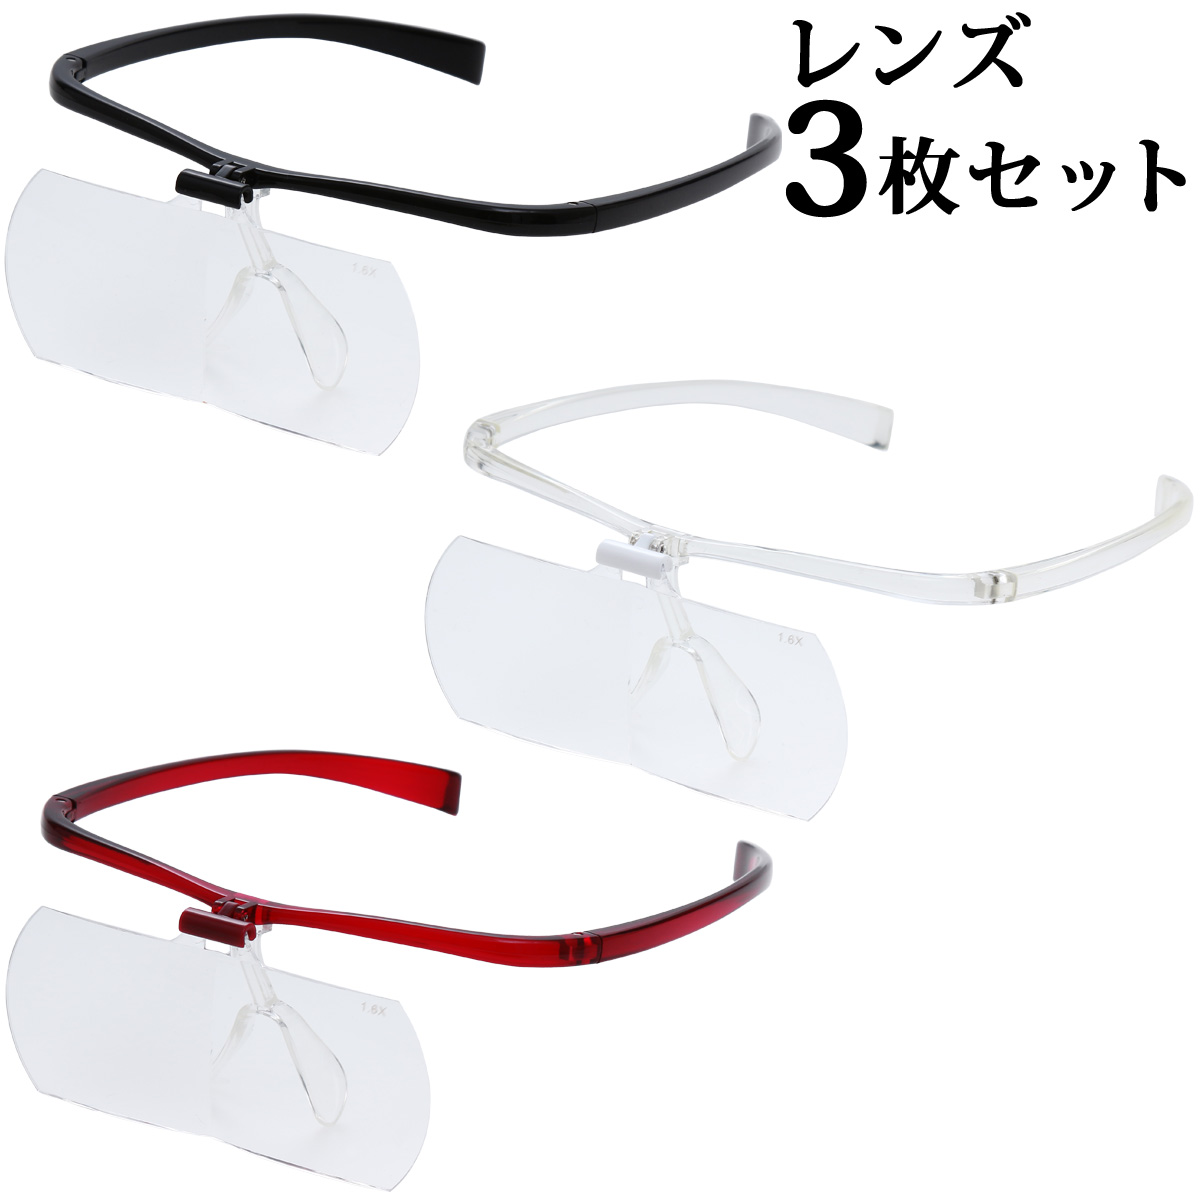 Binocular Glasses Magnifying Glasses Type 1.6times 2times 2.3times Lens 3pcs Set HF - 60DEF Clear Loupe Ikeda Lens from the Top of Glasses